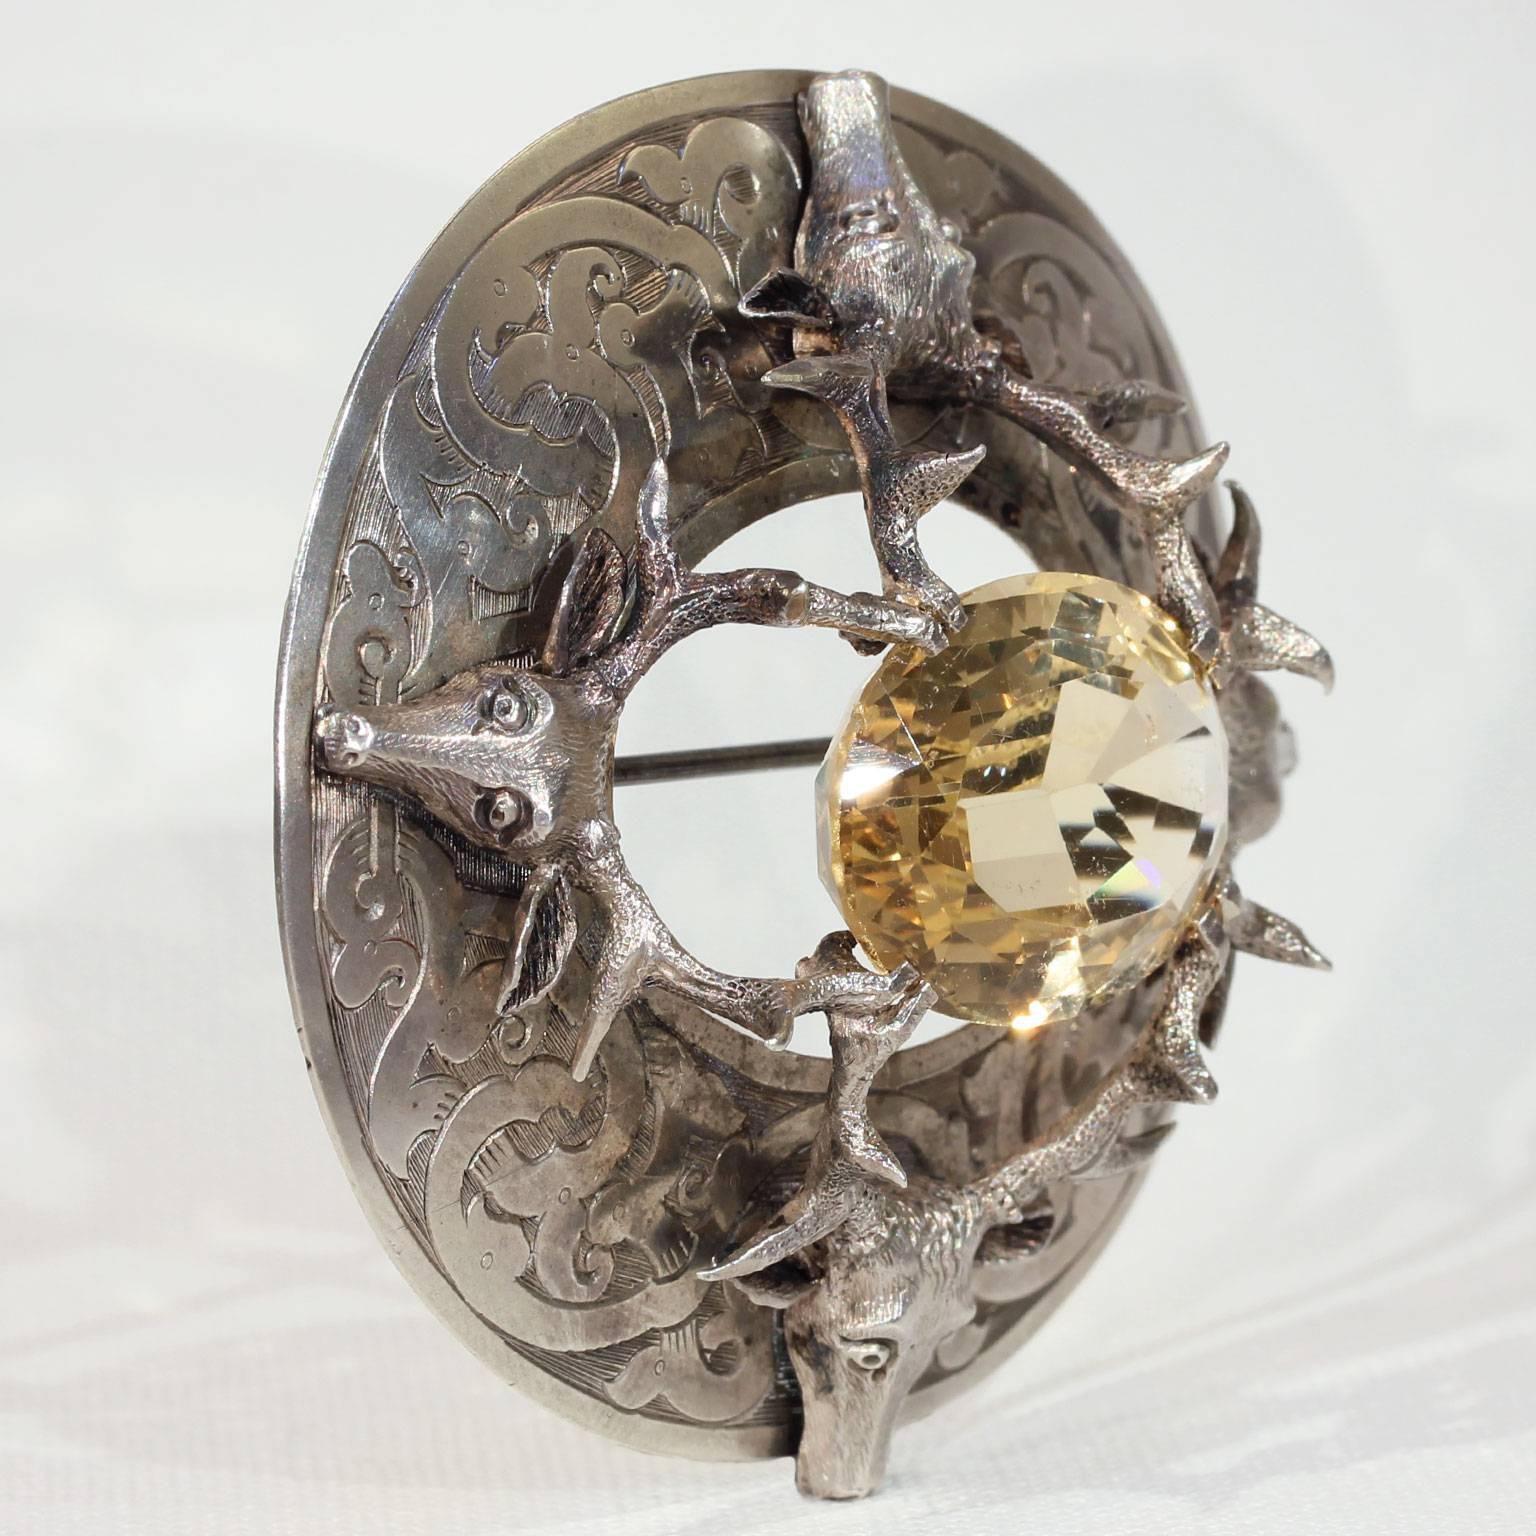 This awesome and very large antique Victorian citrine silver brooch was handcrafted around 1850-60 in Scotland. It features a quadruple deer head motif with the antlers holding the oval faceted citrine in place. This stone measures 27.4 x 19.3 x